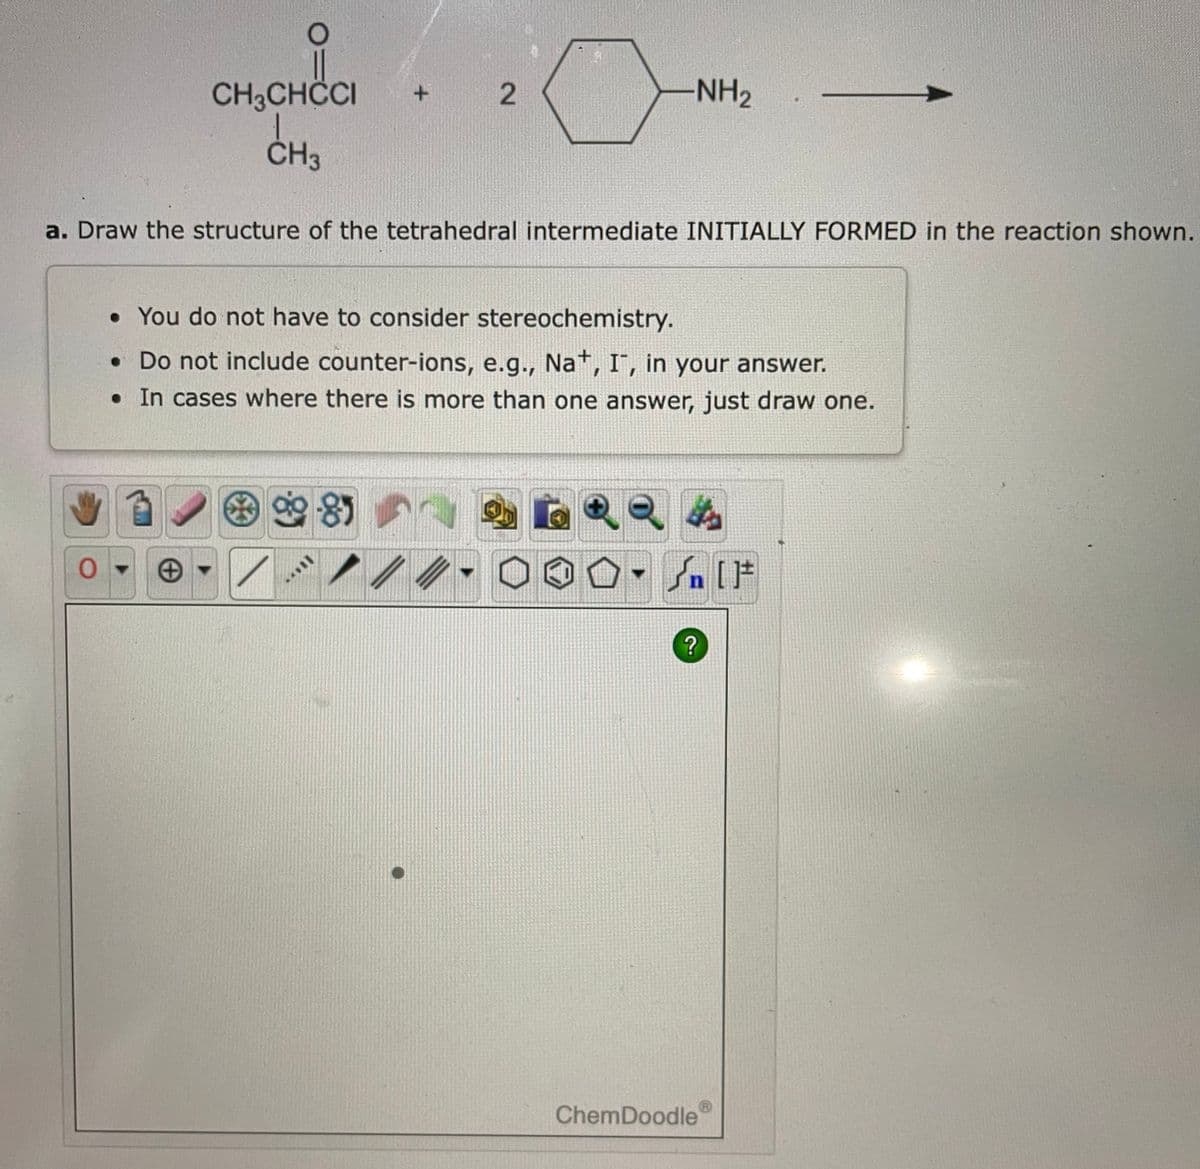 CH3CHCCI
CH3
O
+
a. Draw the structure of the tetrahedral intermediate INITIALLY FORMED in the reaction shown.
*
2
9985
-NH₂
• You do not have to consider stereochemistry.
• Do not include counter-ions, e.g., Na+, I, in your answer.
. In cases where there is more than one answer, just draw one.
?
ChemDoodle
LET